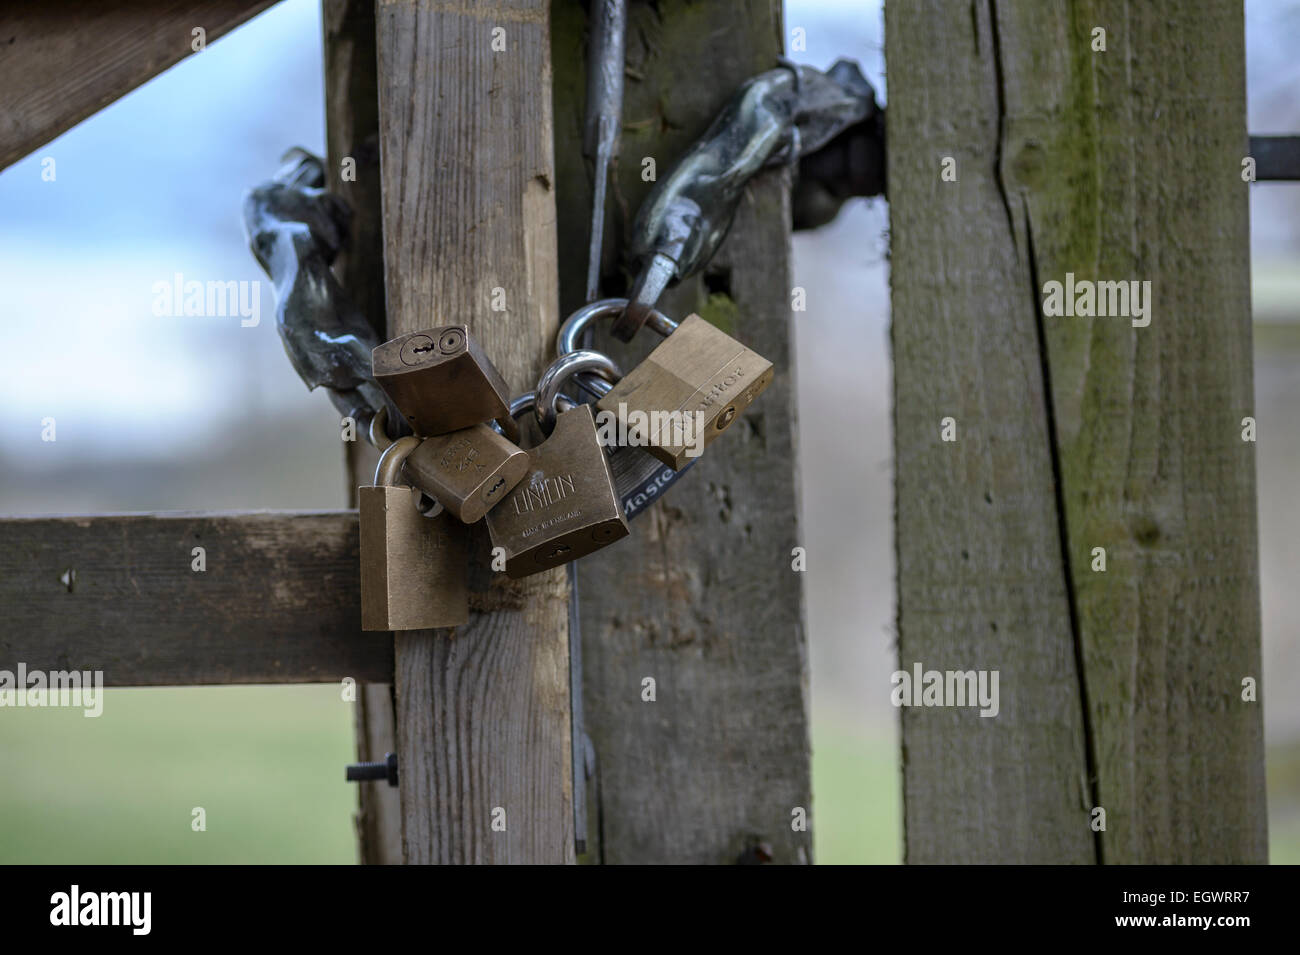 Six interlinked padlocks with integrated locking mechanisms secure a wooden gate against a fencepost in rural UK. Stock Photo